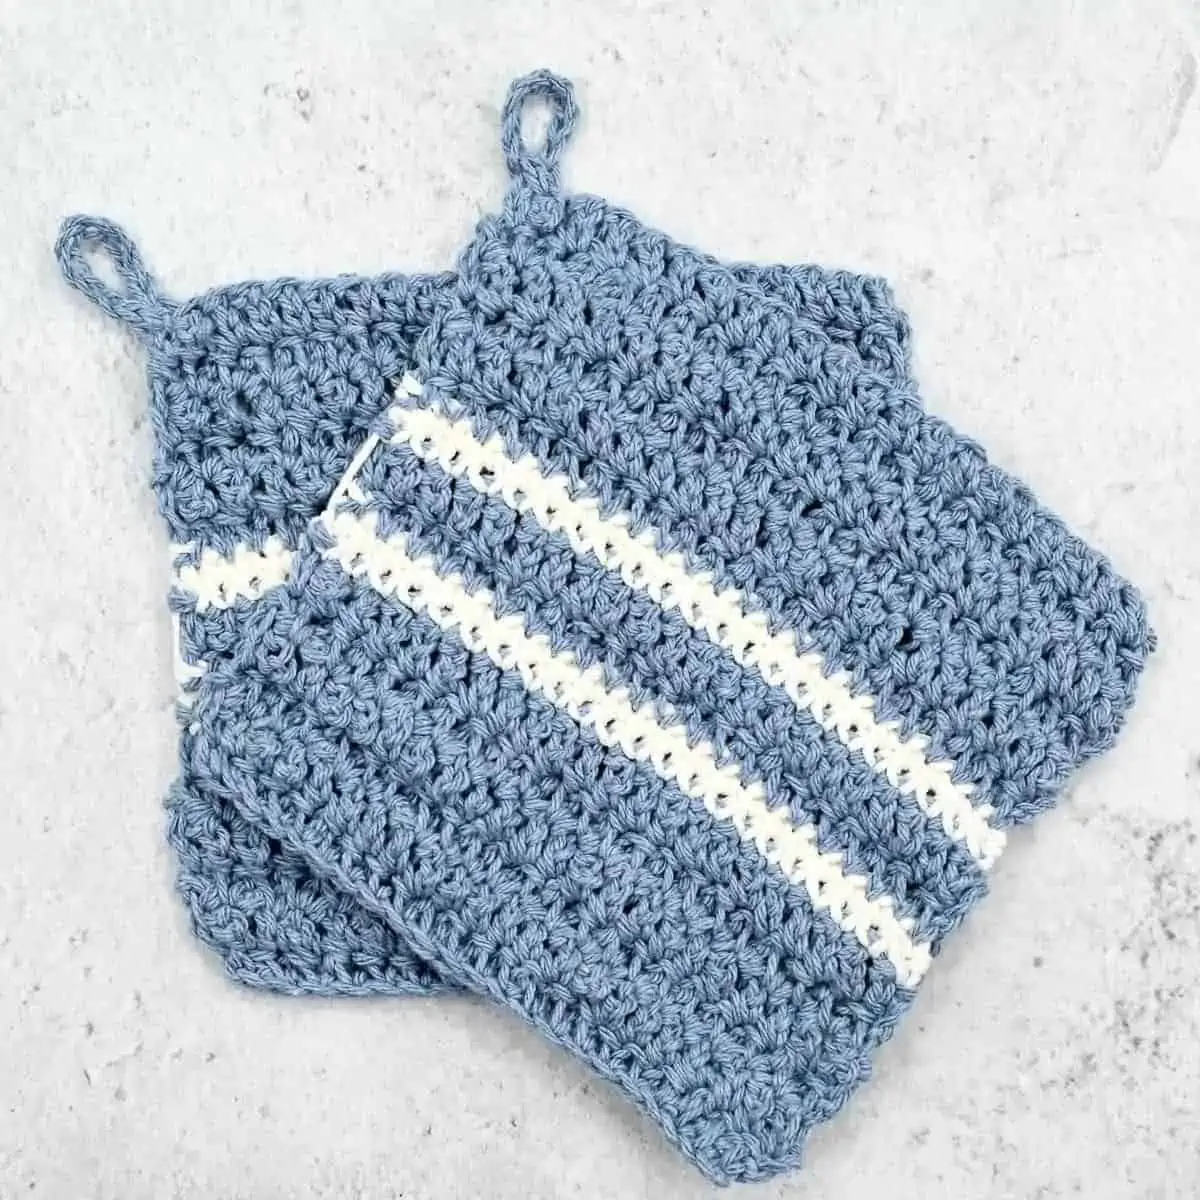 blue crochet potholders with white stripes laying flat on a counter